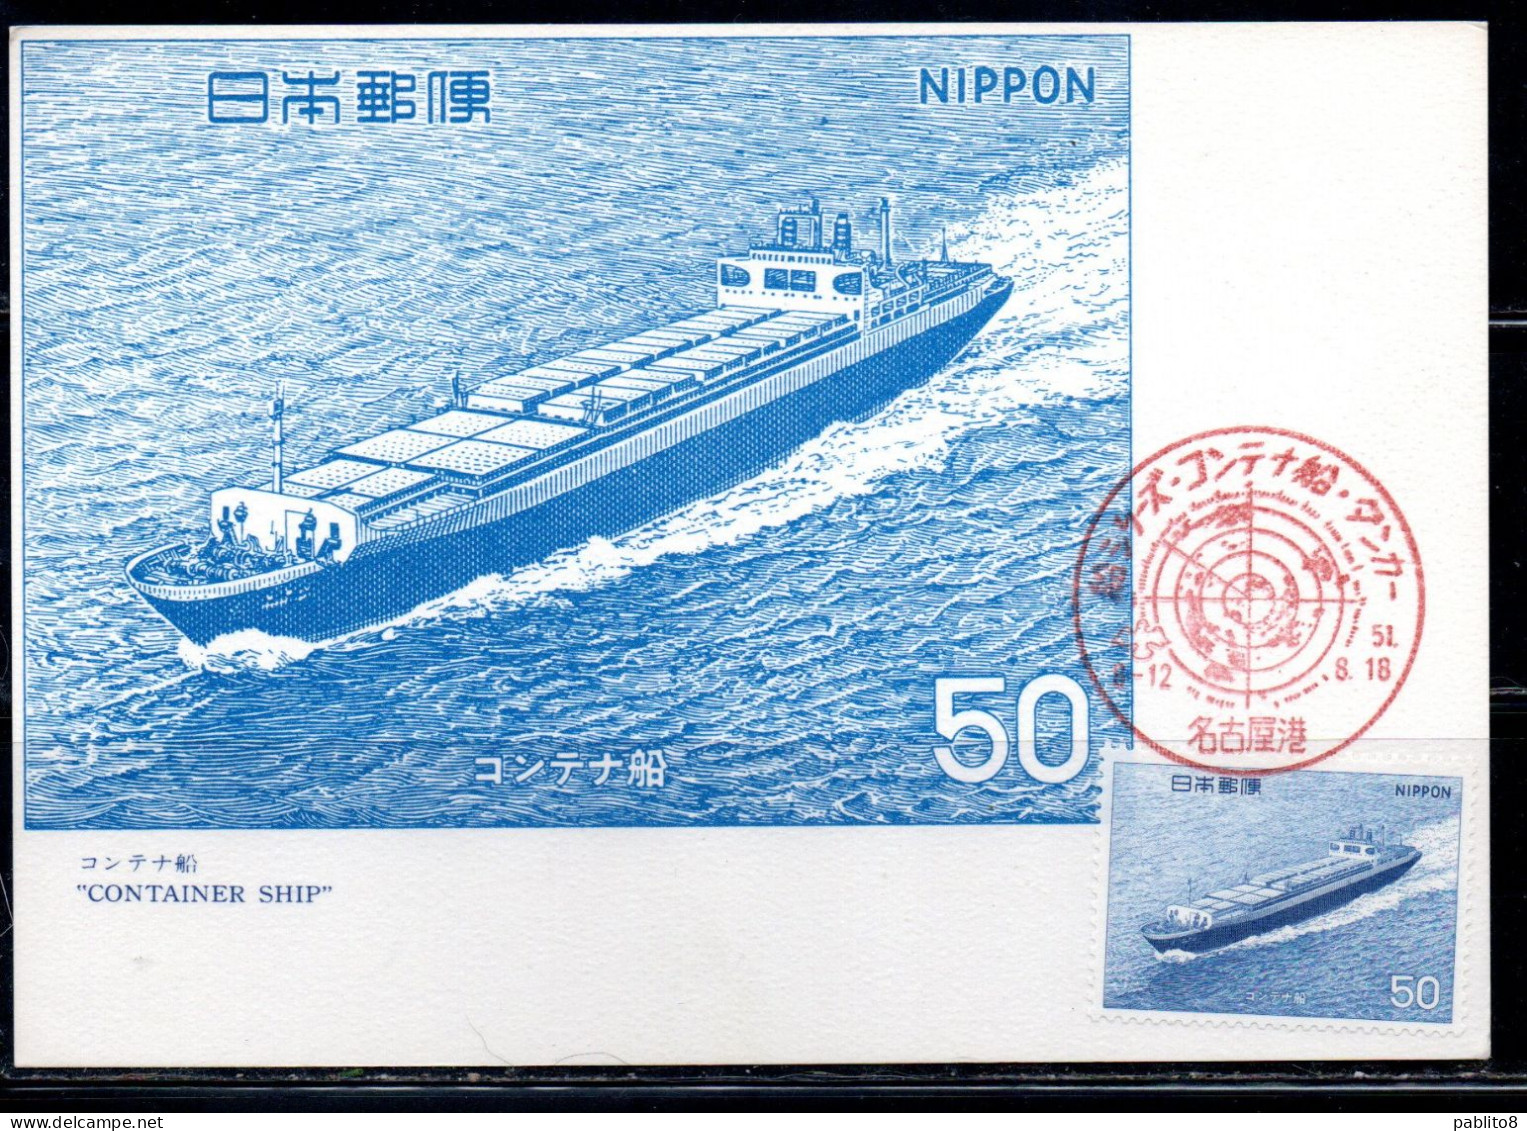 JAPAN GIAPPONE 1975 1976 HISTORIC SHIPS ISSUE CONTAINER SHIP 50y MAXI MAXIMUM CARD - Maximumkarten